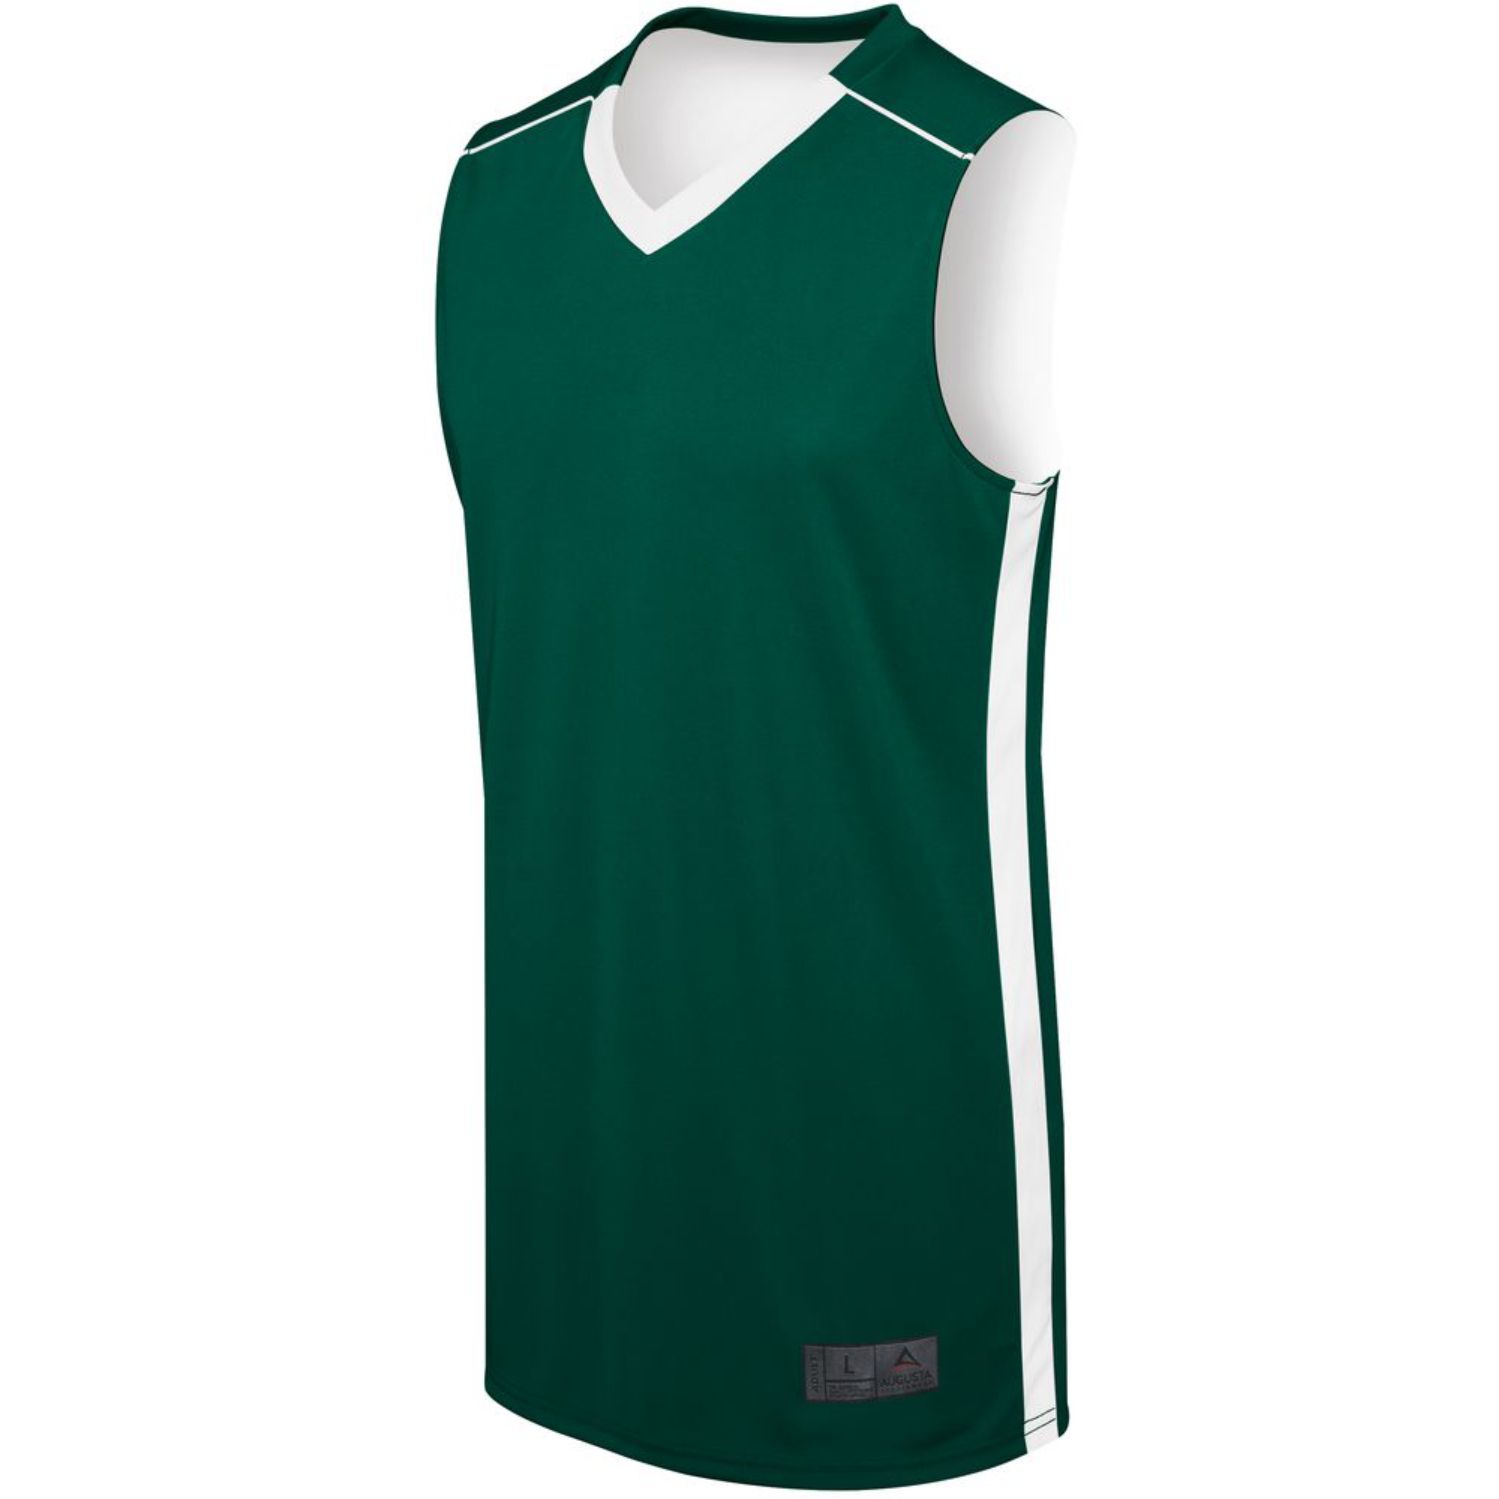 Augusta Sportswear Adult Competition Reversible Jersey #332400 Forest Green / White